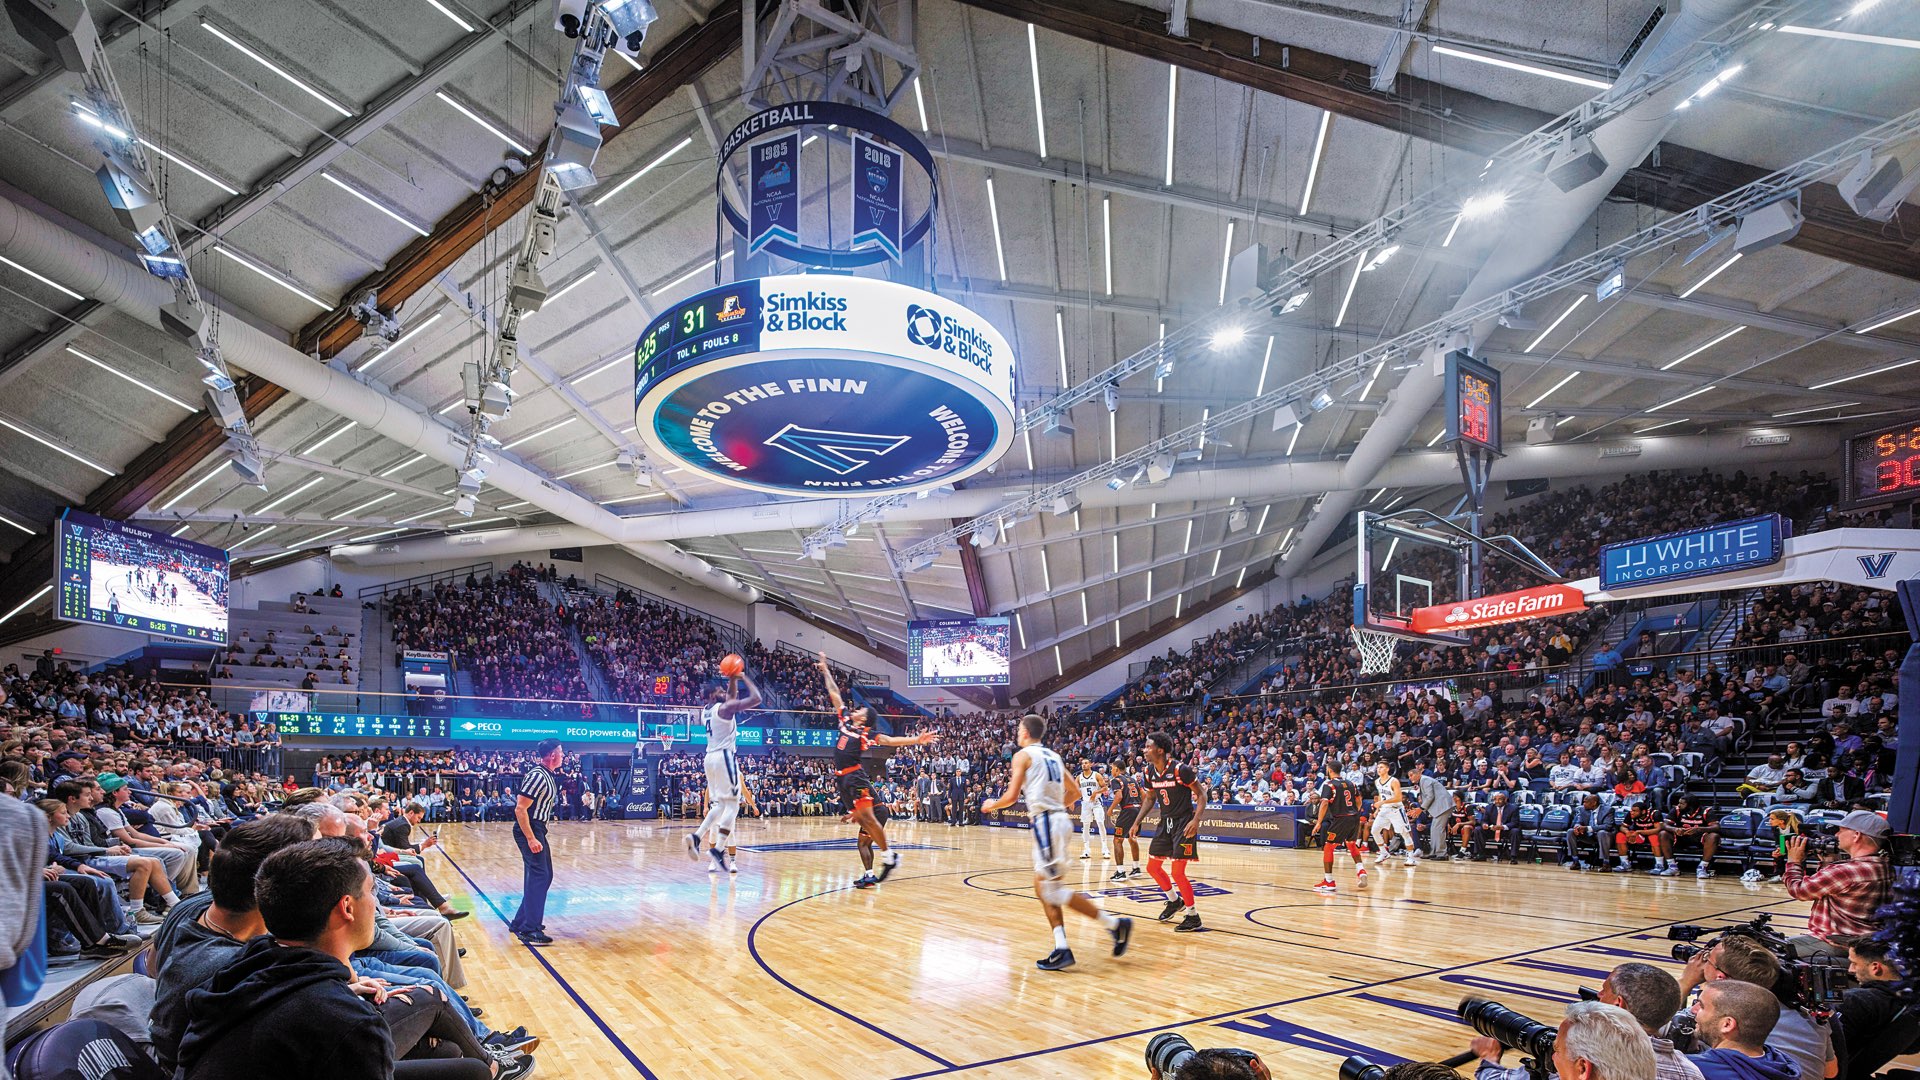 Inside the Finneran Pavilion, Villanova’s Men’s Basketball players in mid-game on the court with packed stands